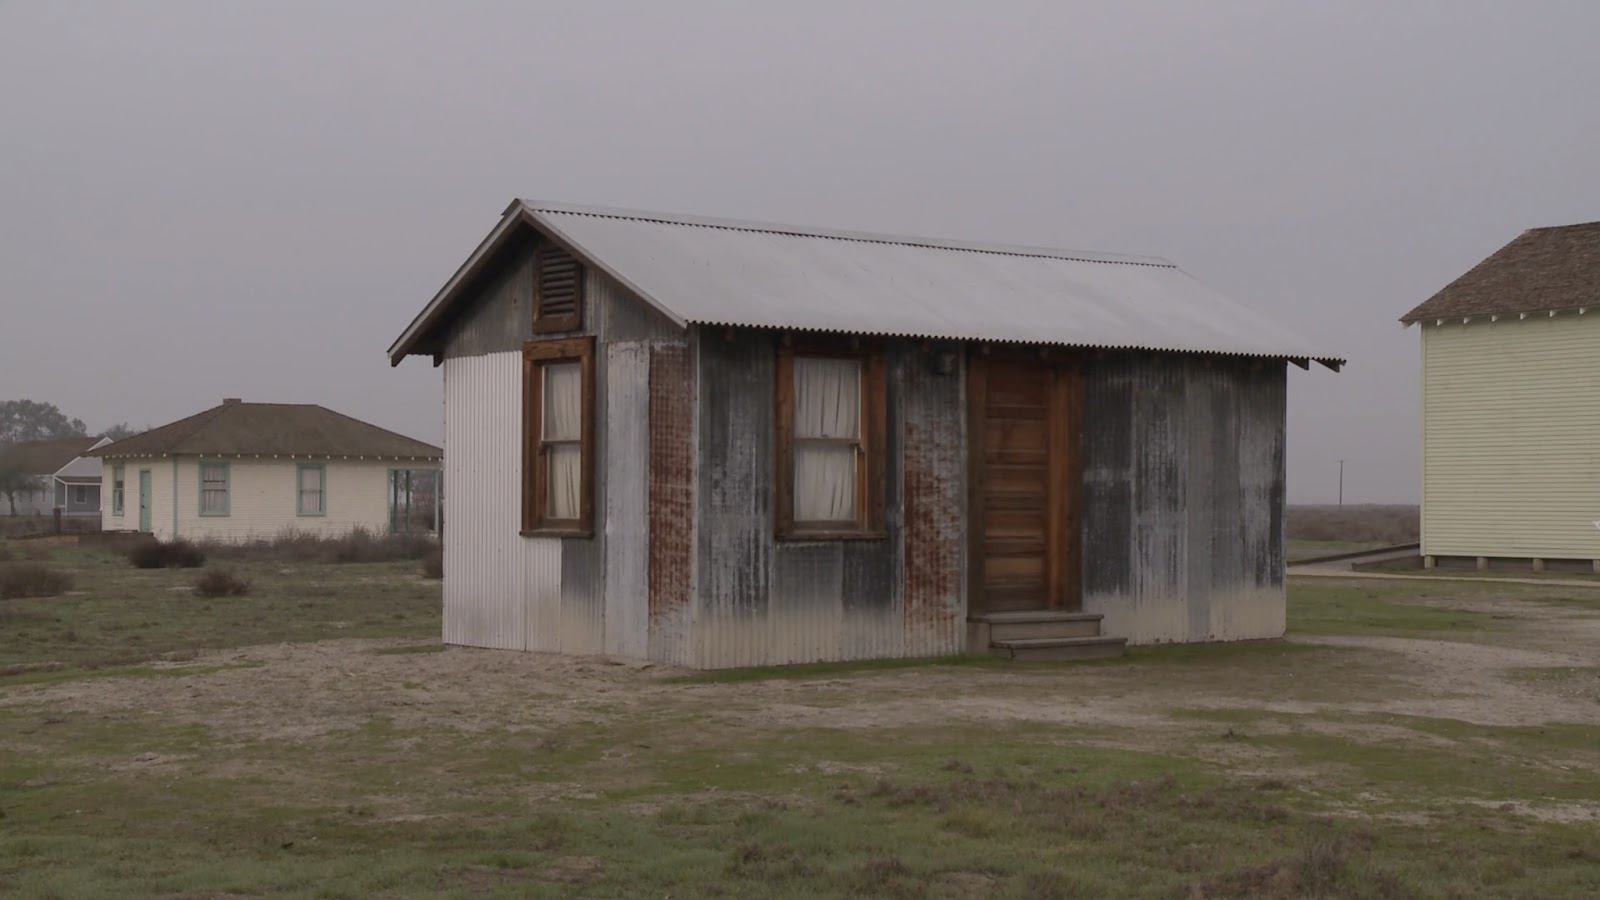 From the film ALLENSWORTH, a small shack sit on bare land, with other houses on either side. The shack is rusted and old.